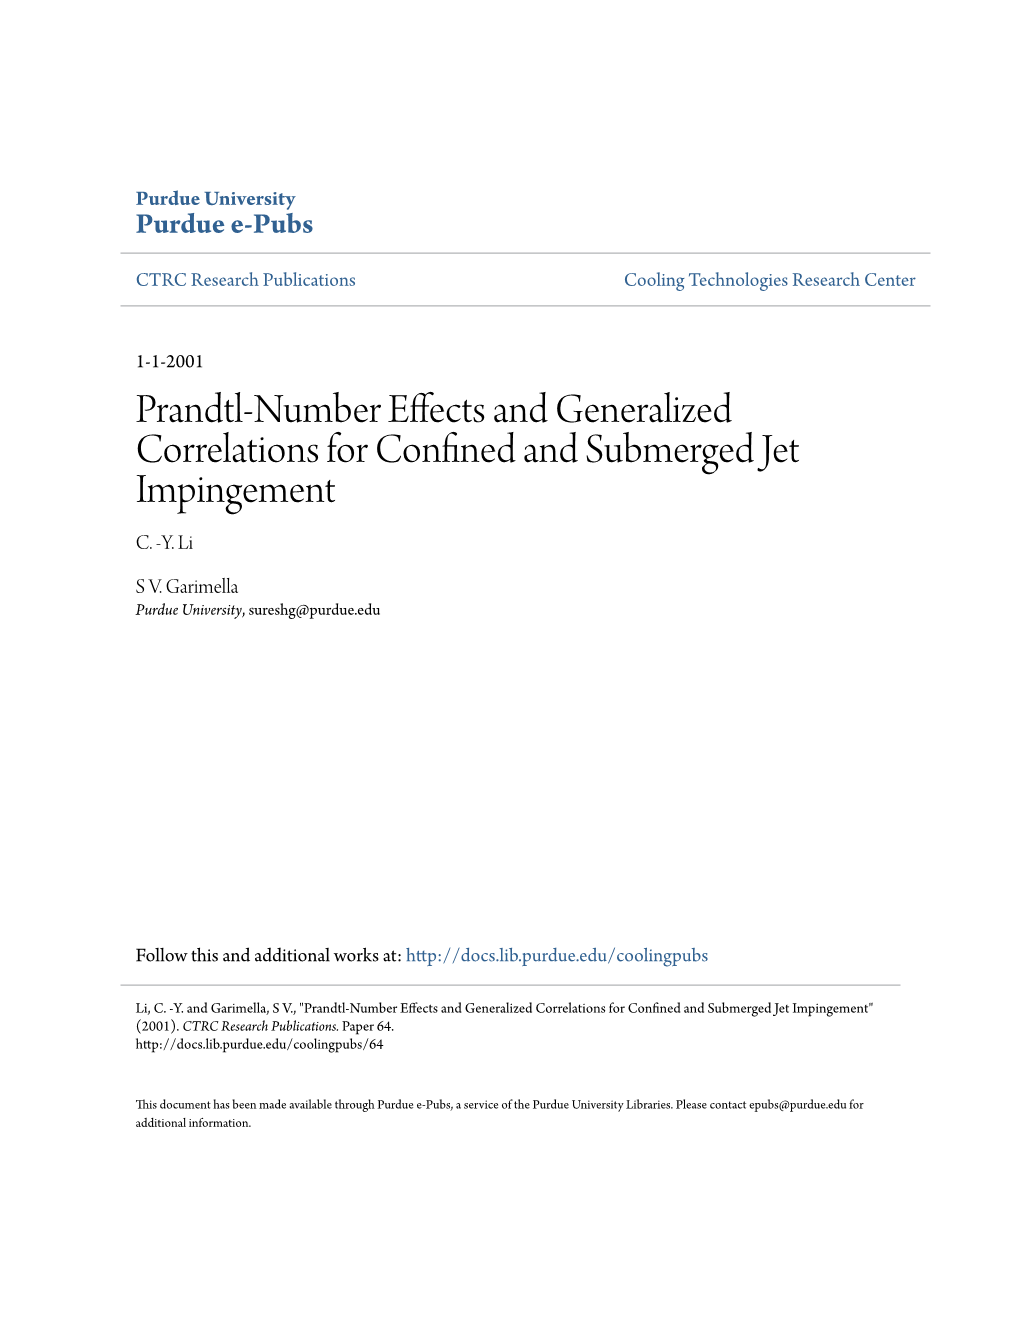 Prandtl-Number Effects and Generalized Correlations for Confined Nda Submerged Jet Impingement C